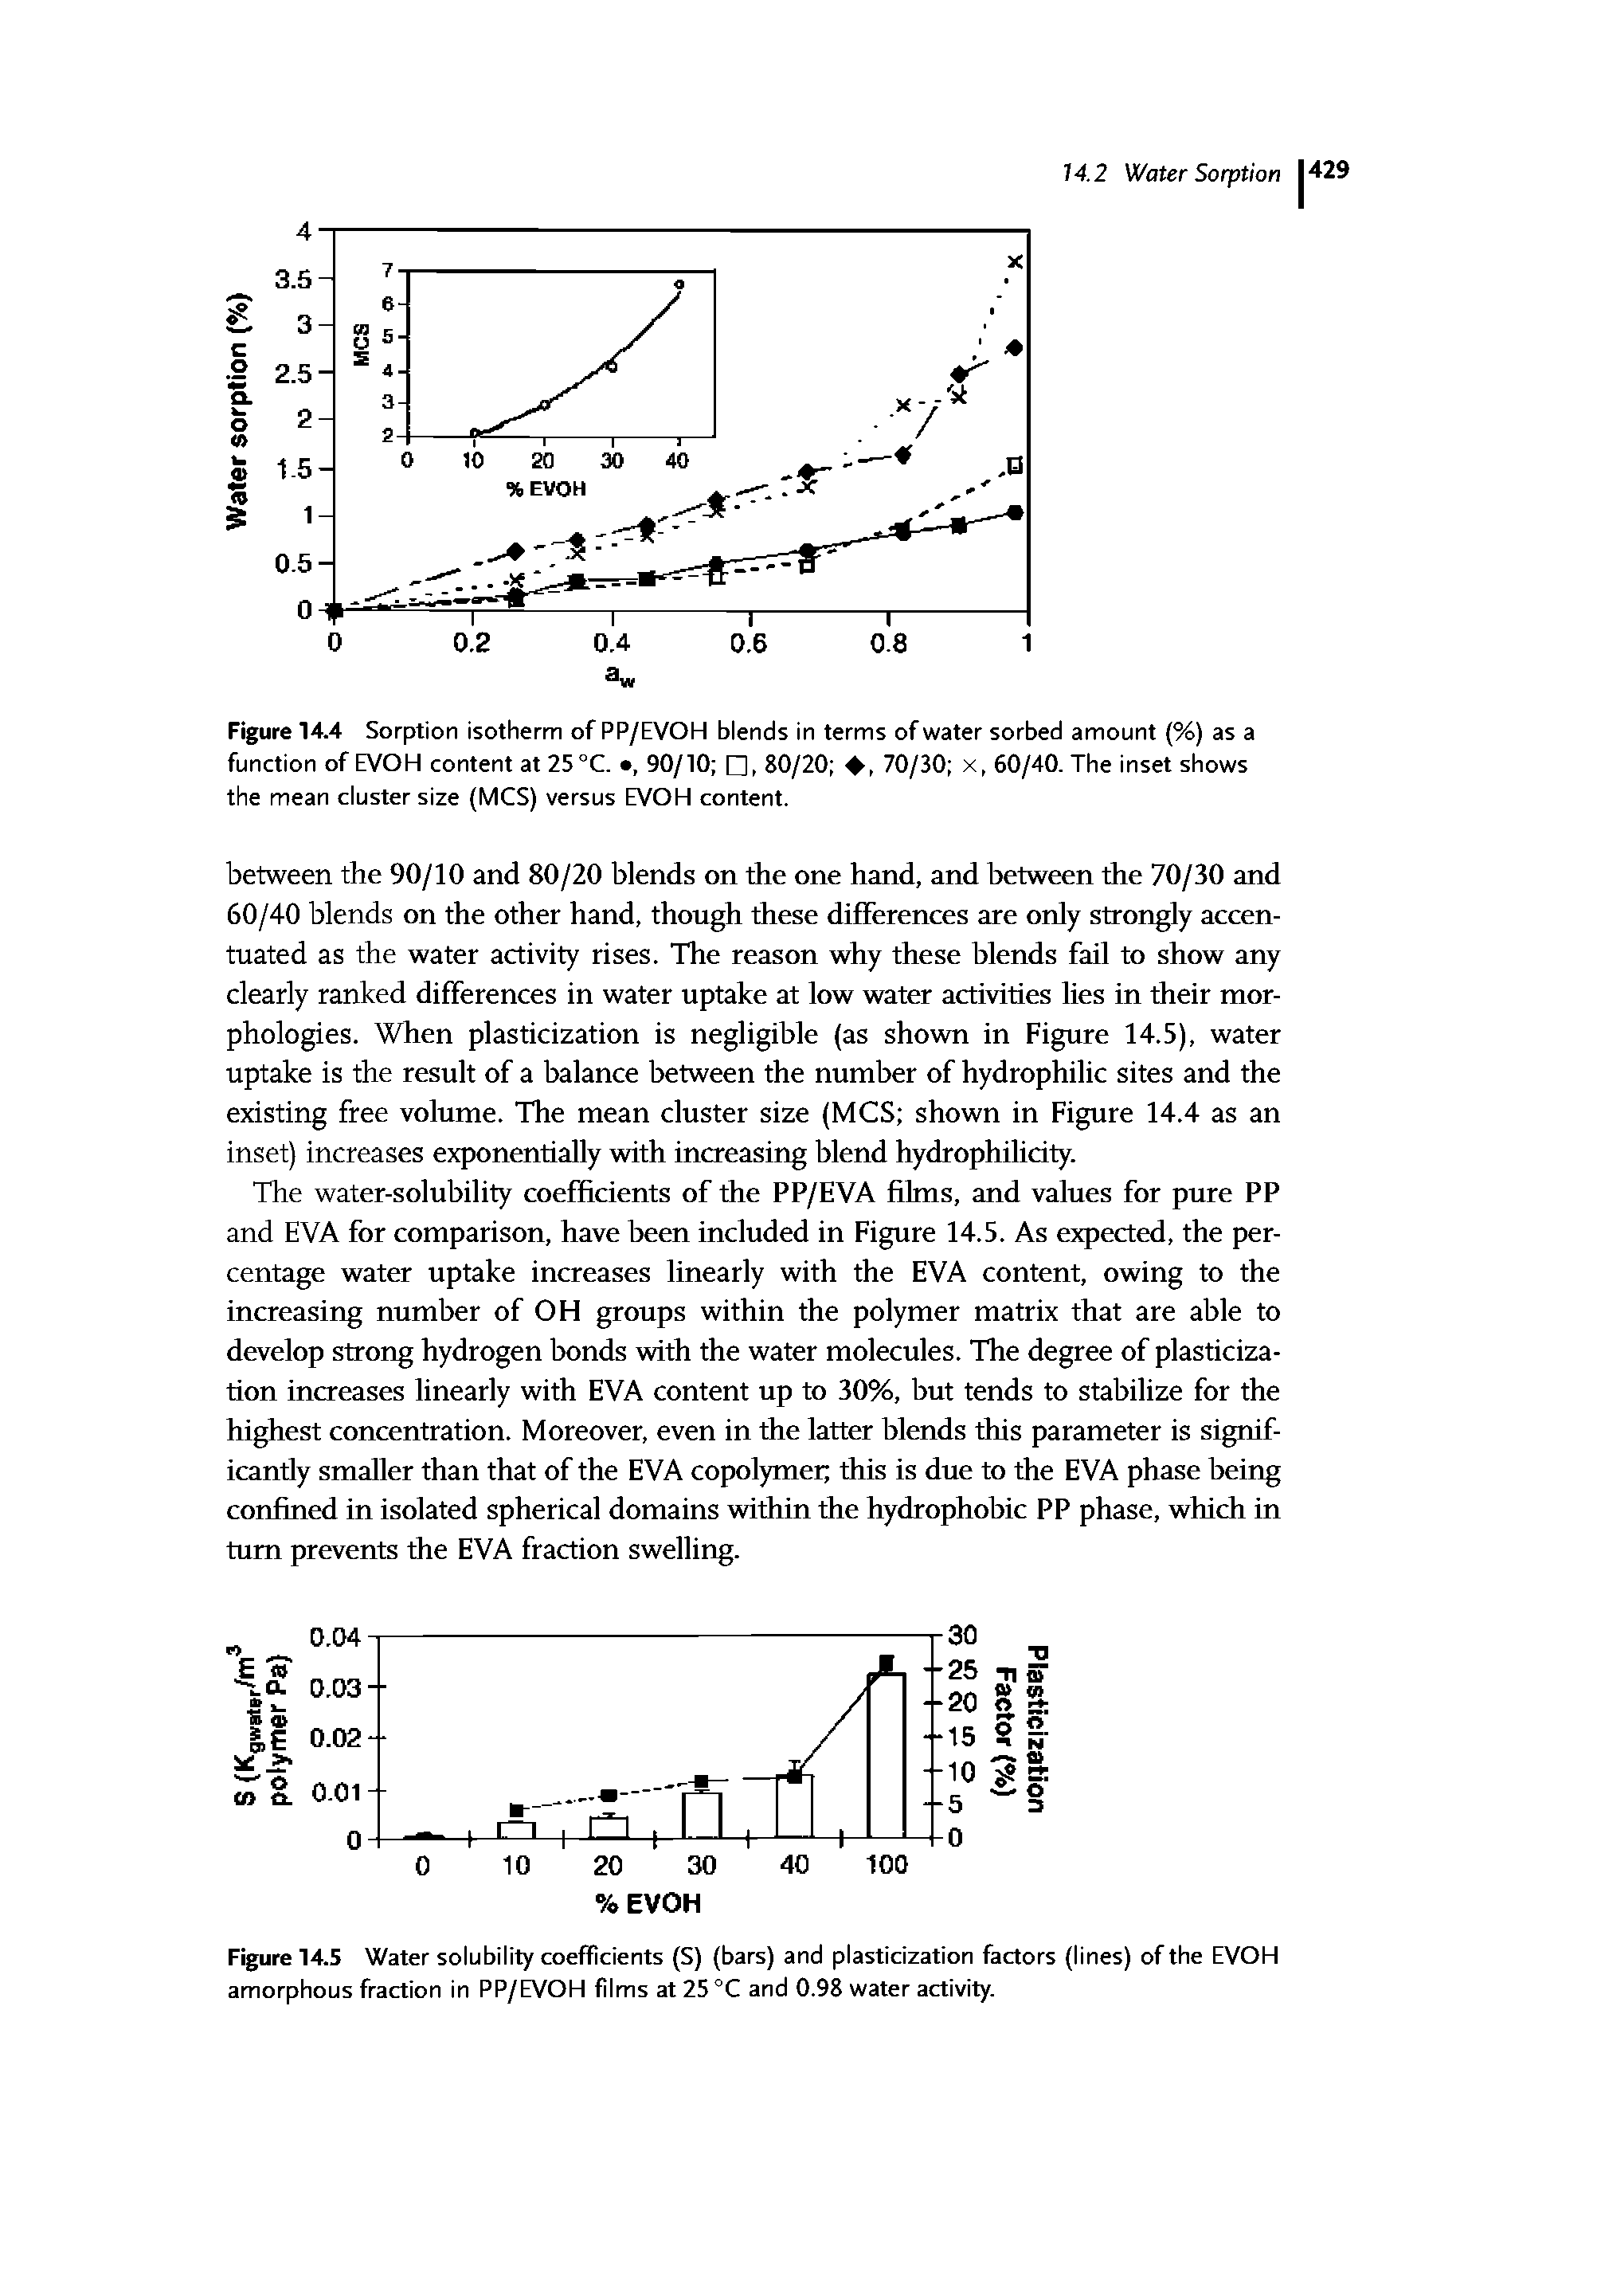 Figure 14.5 Water solubility coefficients (S) (bars) and plasticization factors (lines) of the EVOH amorphous fraction in PP/EVOH films at 25 °C and 0.98 water activity.